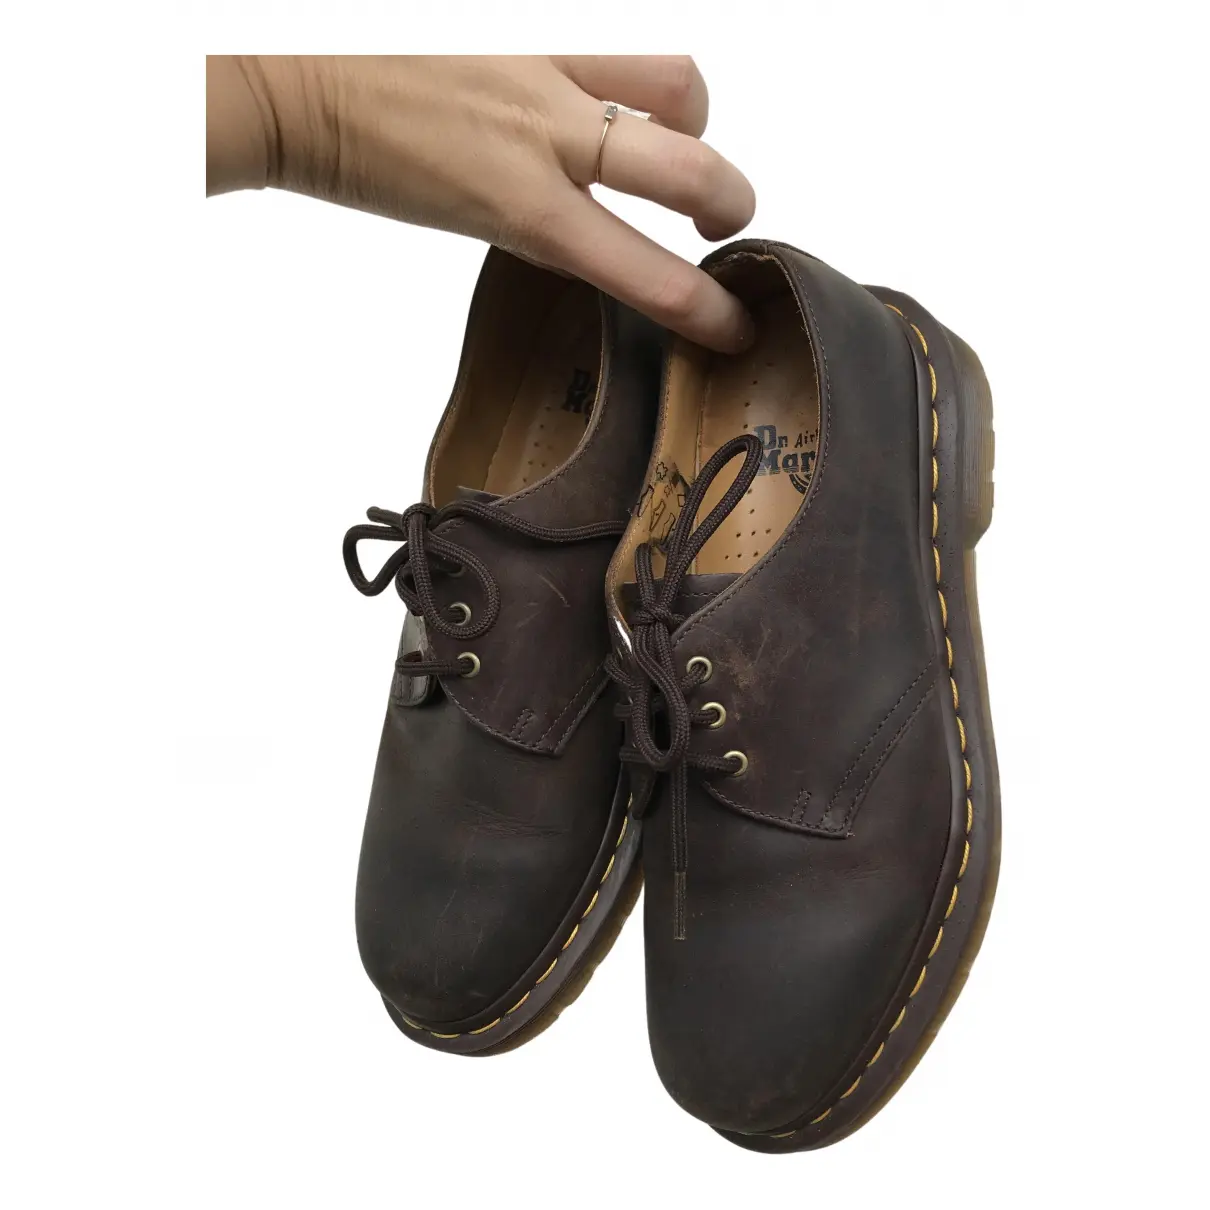 Buy Dr. Martens 1461 (3 eye) leather lace ups online